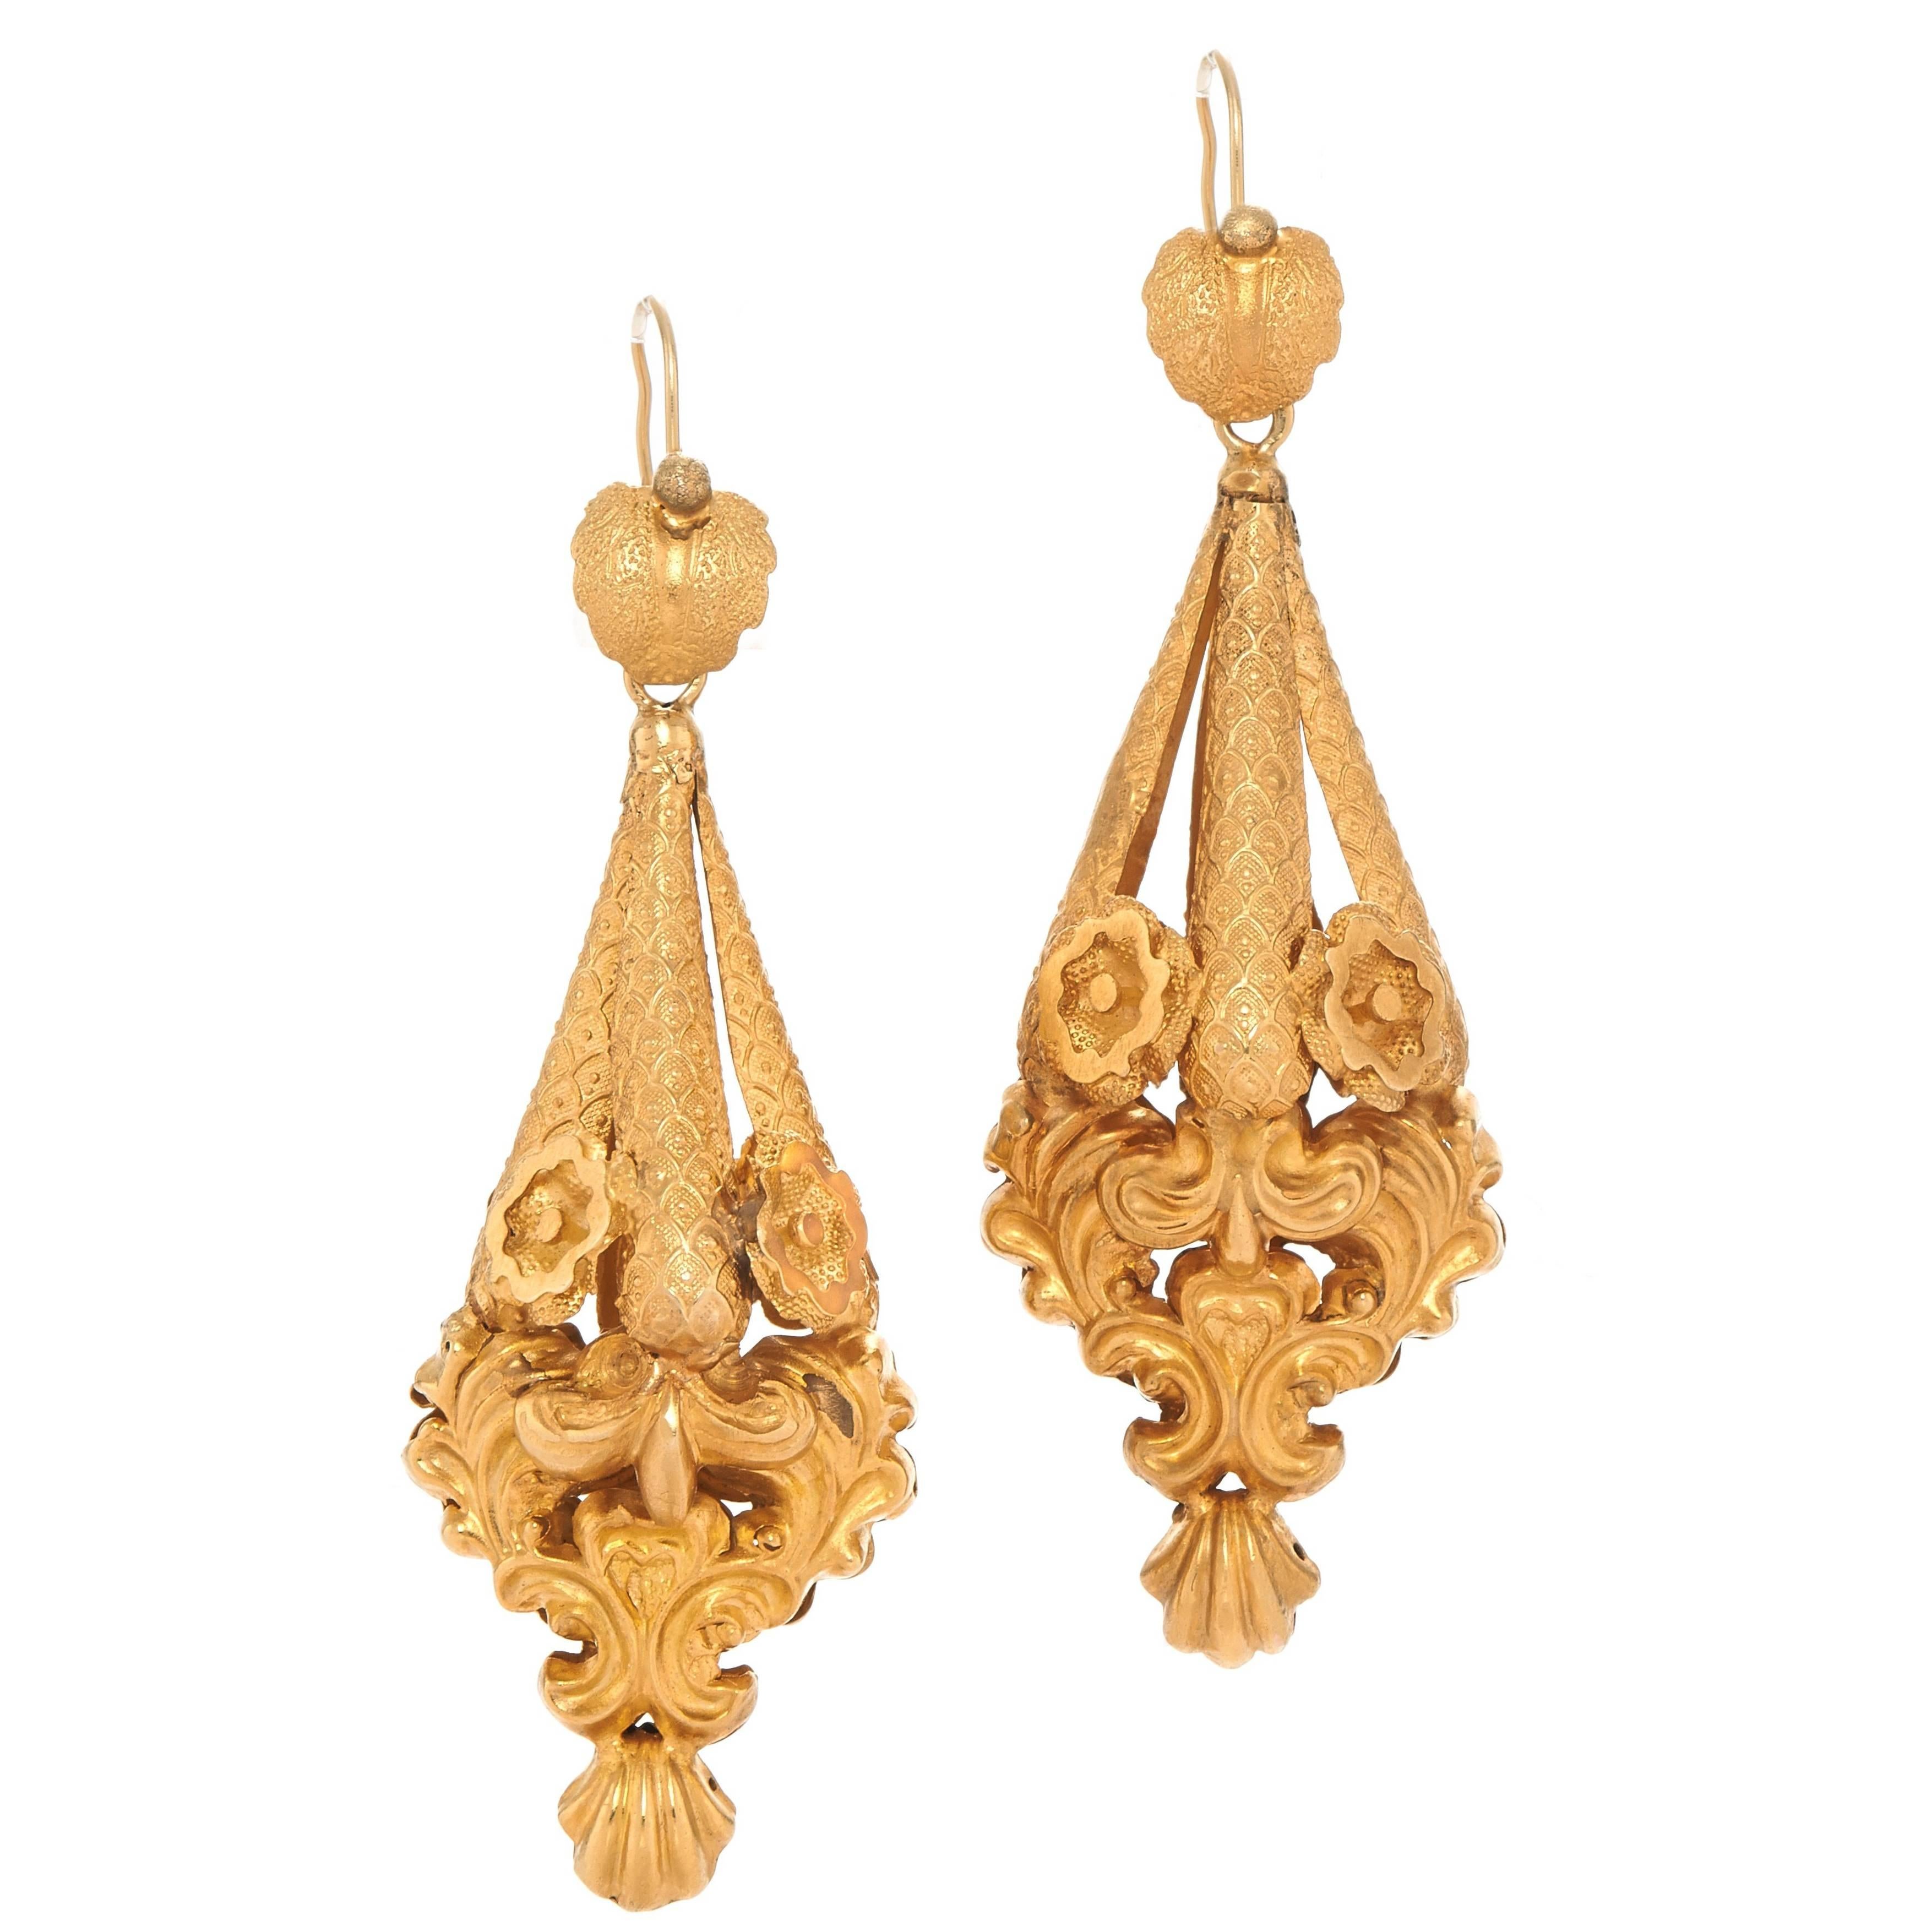 Pair of Antique Victorian Foliate Scrollwork Gold Pendant Earrings